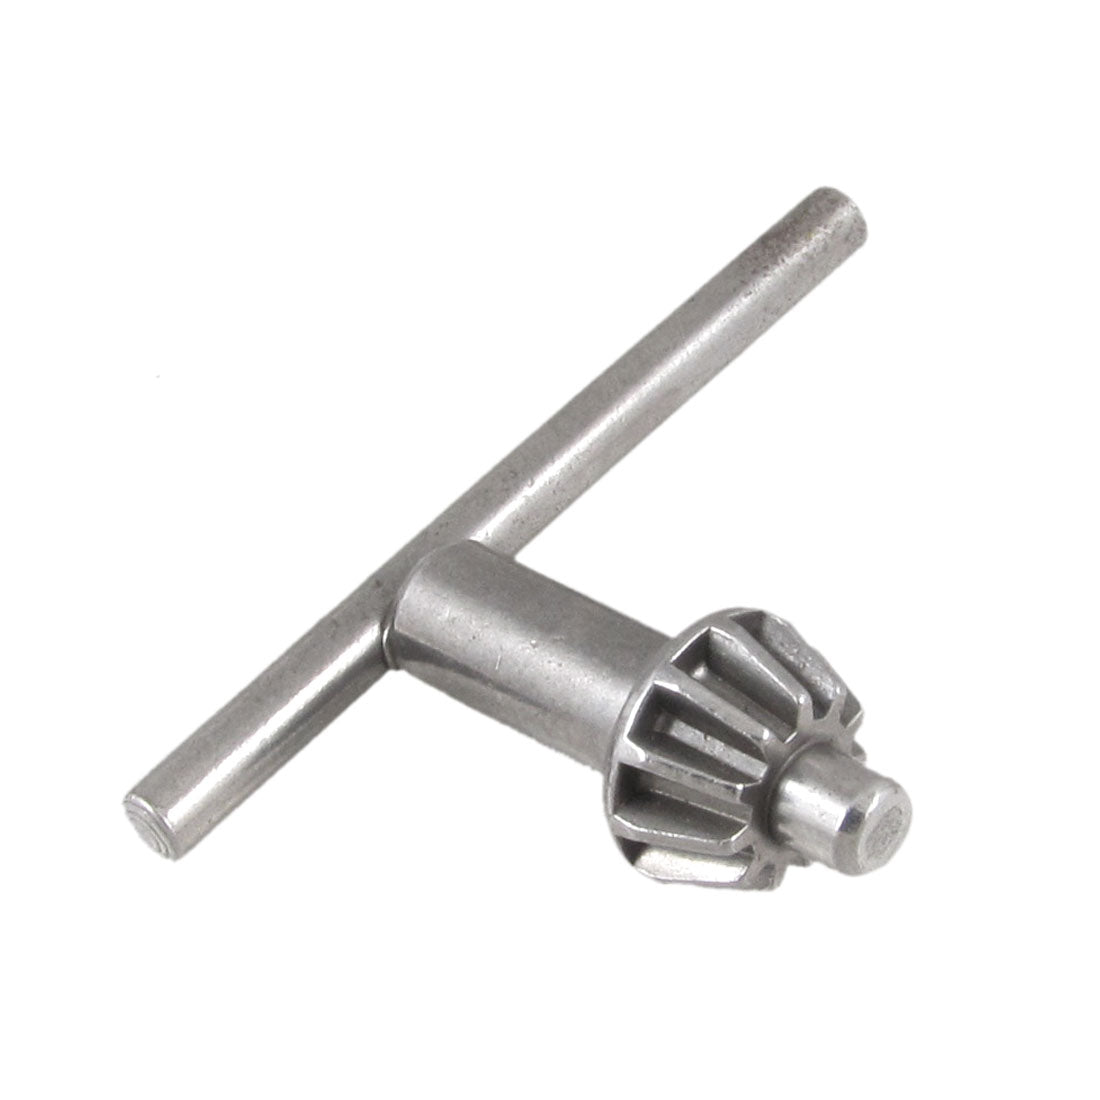 uxcell Uxcell Drill Chuck Key 8mm Pilot 21.5mm Gear for Impact Driver Drills Tools Wrench